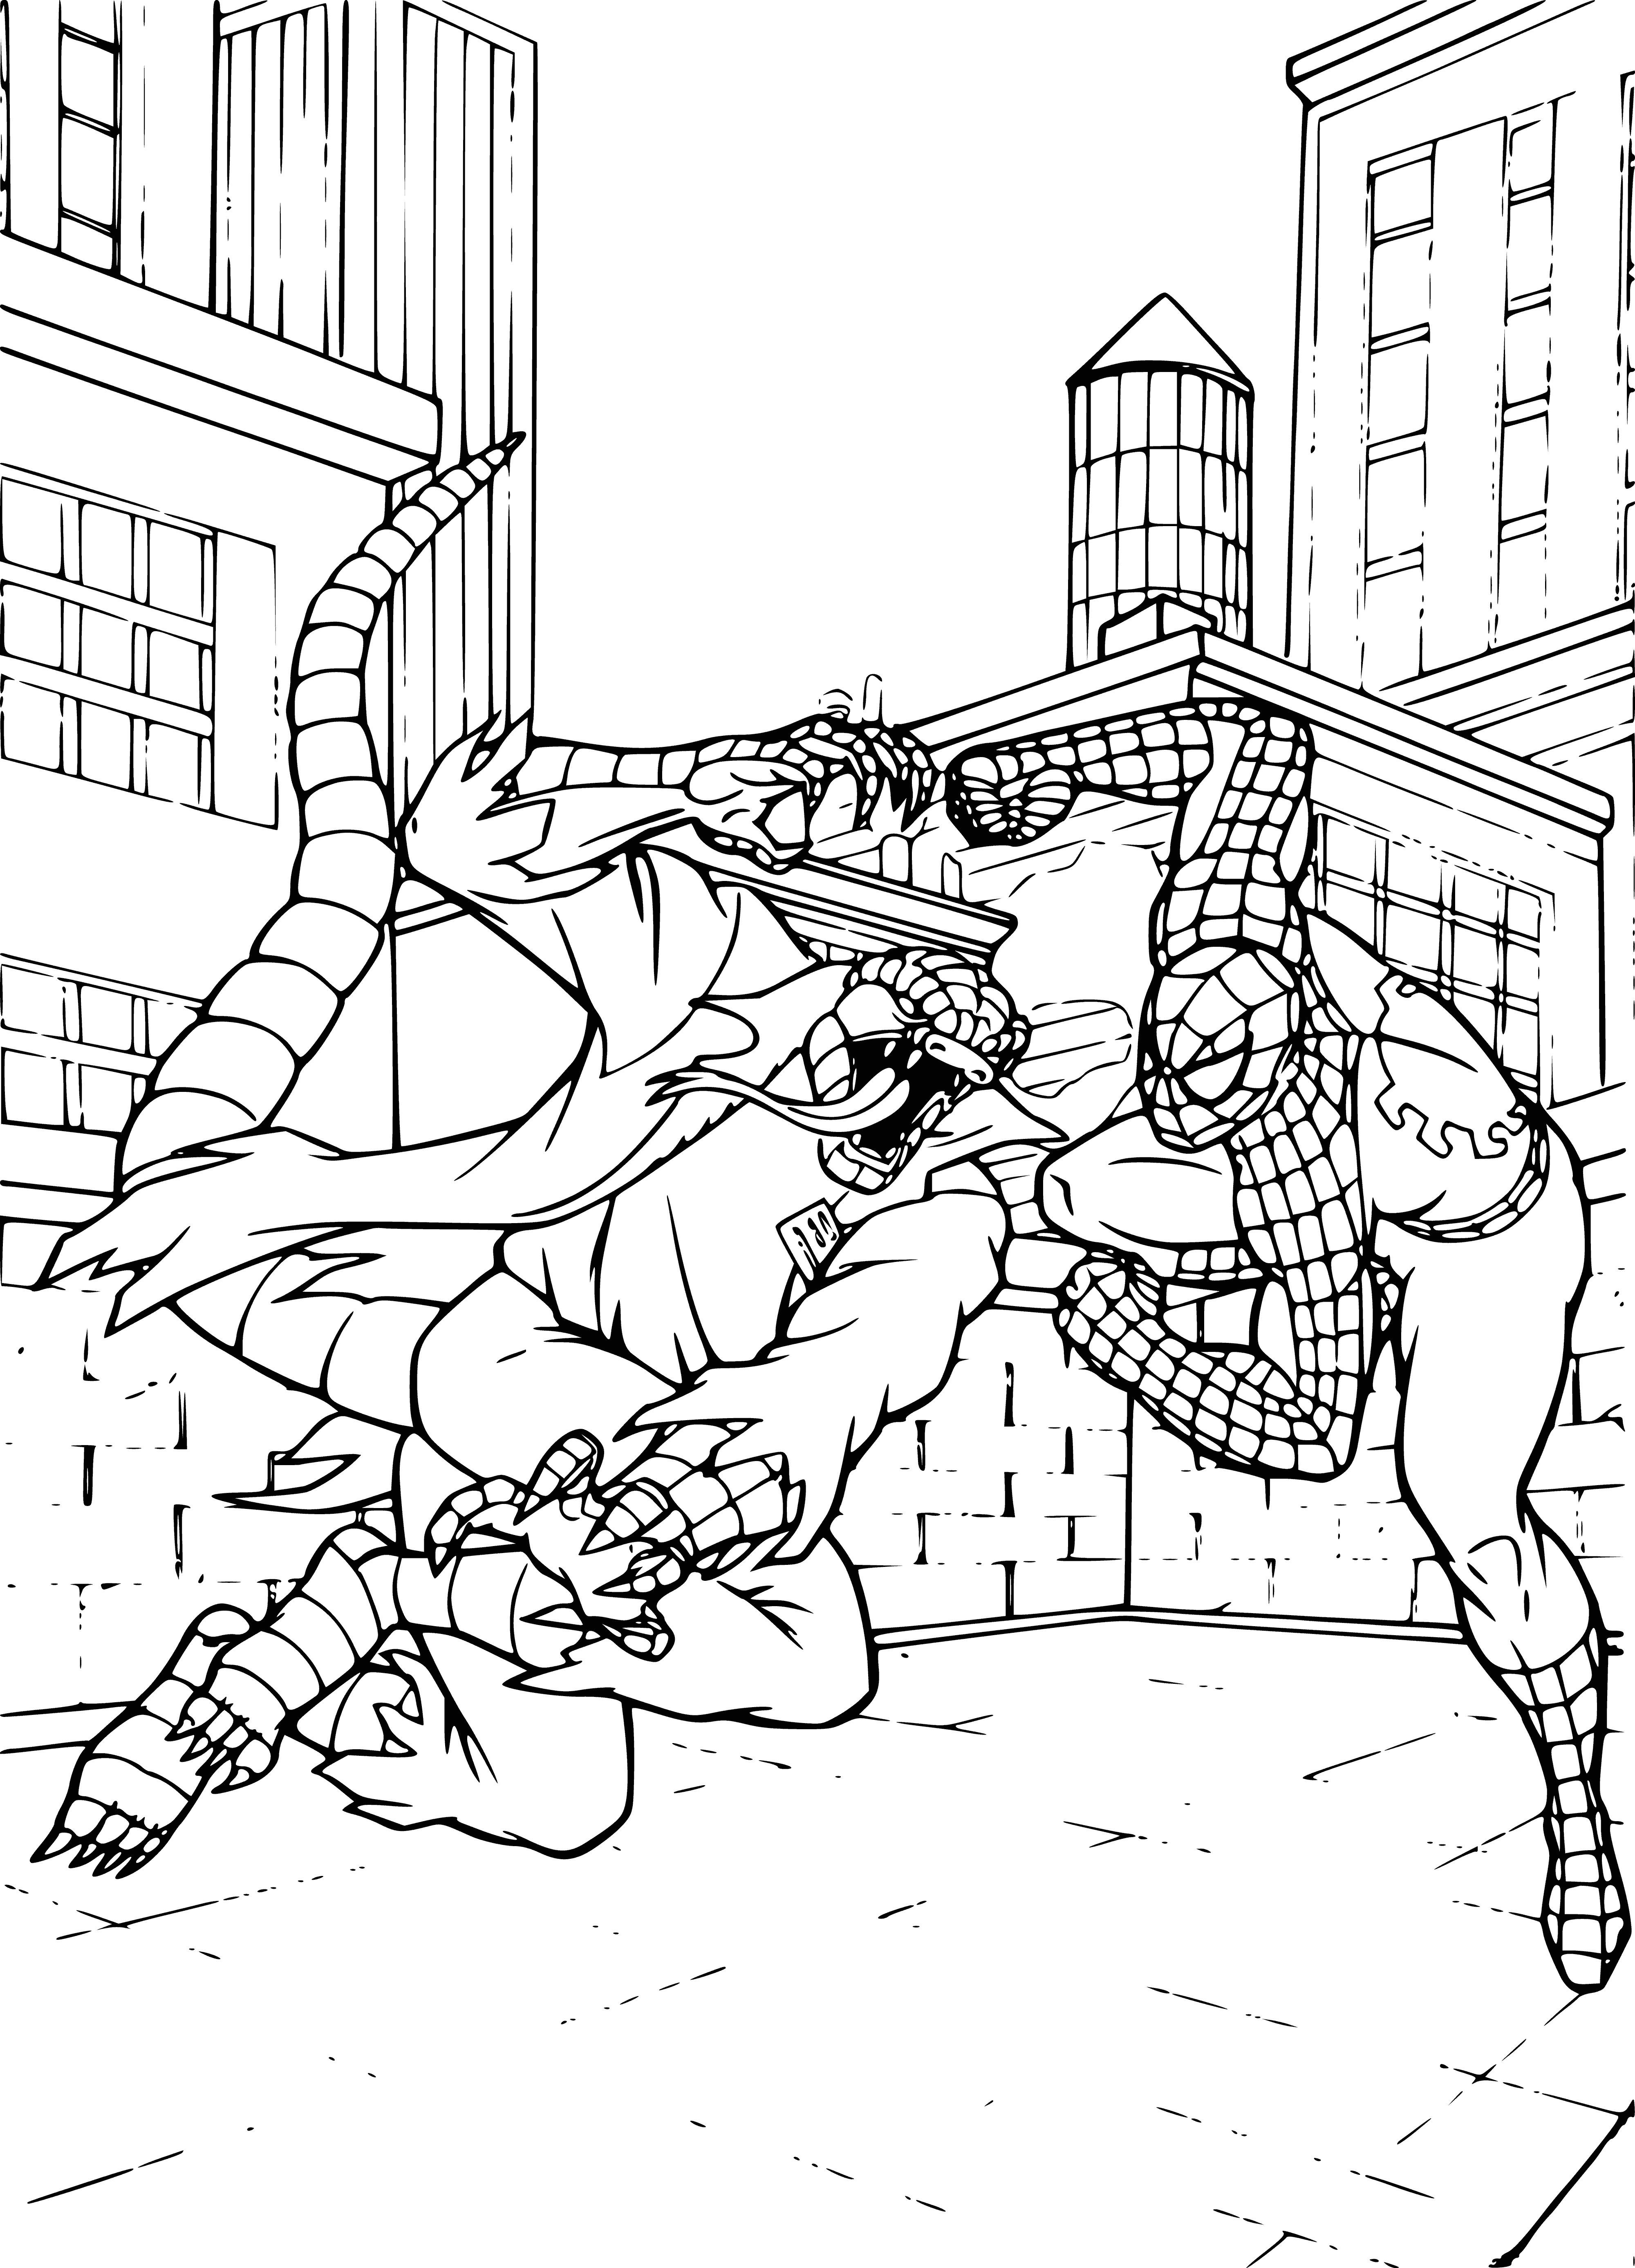 coloring page: Spider-Man & The Lizard face off in a colorful battle. Spider-Man in red & blue, The Lizard a fierce green w/ black spots, claws, tail & tongue. Ready to fight!